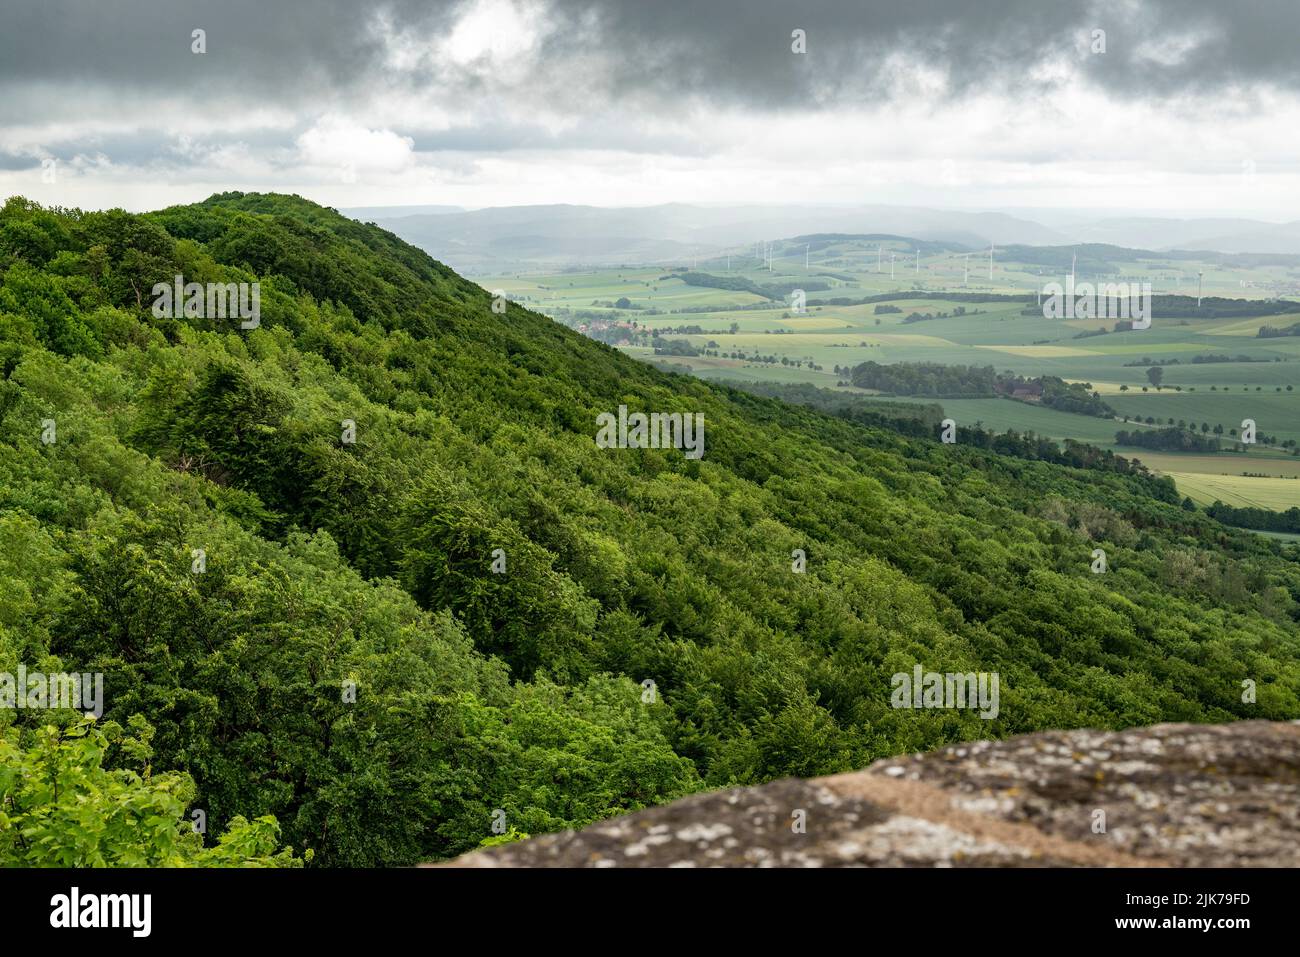 View from the 'Ithturm' lookout tower over the Ith ridge on a cloudy day, Weserbergland, Lower Saxony, Germany Stock Photo